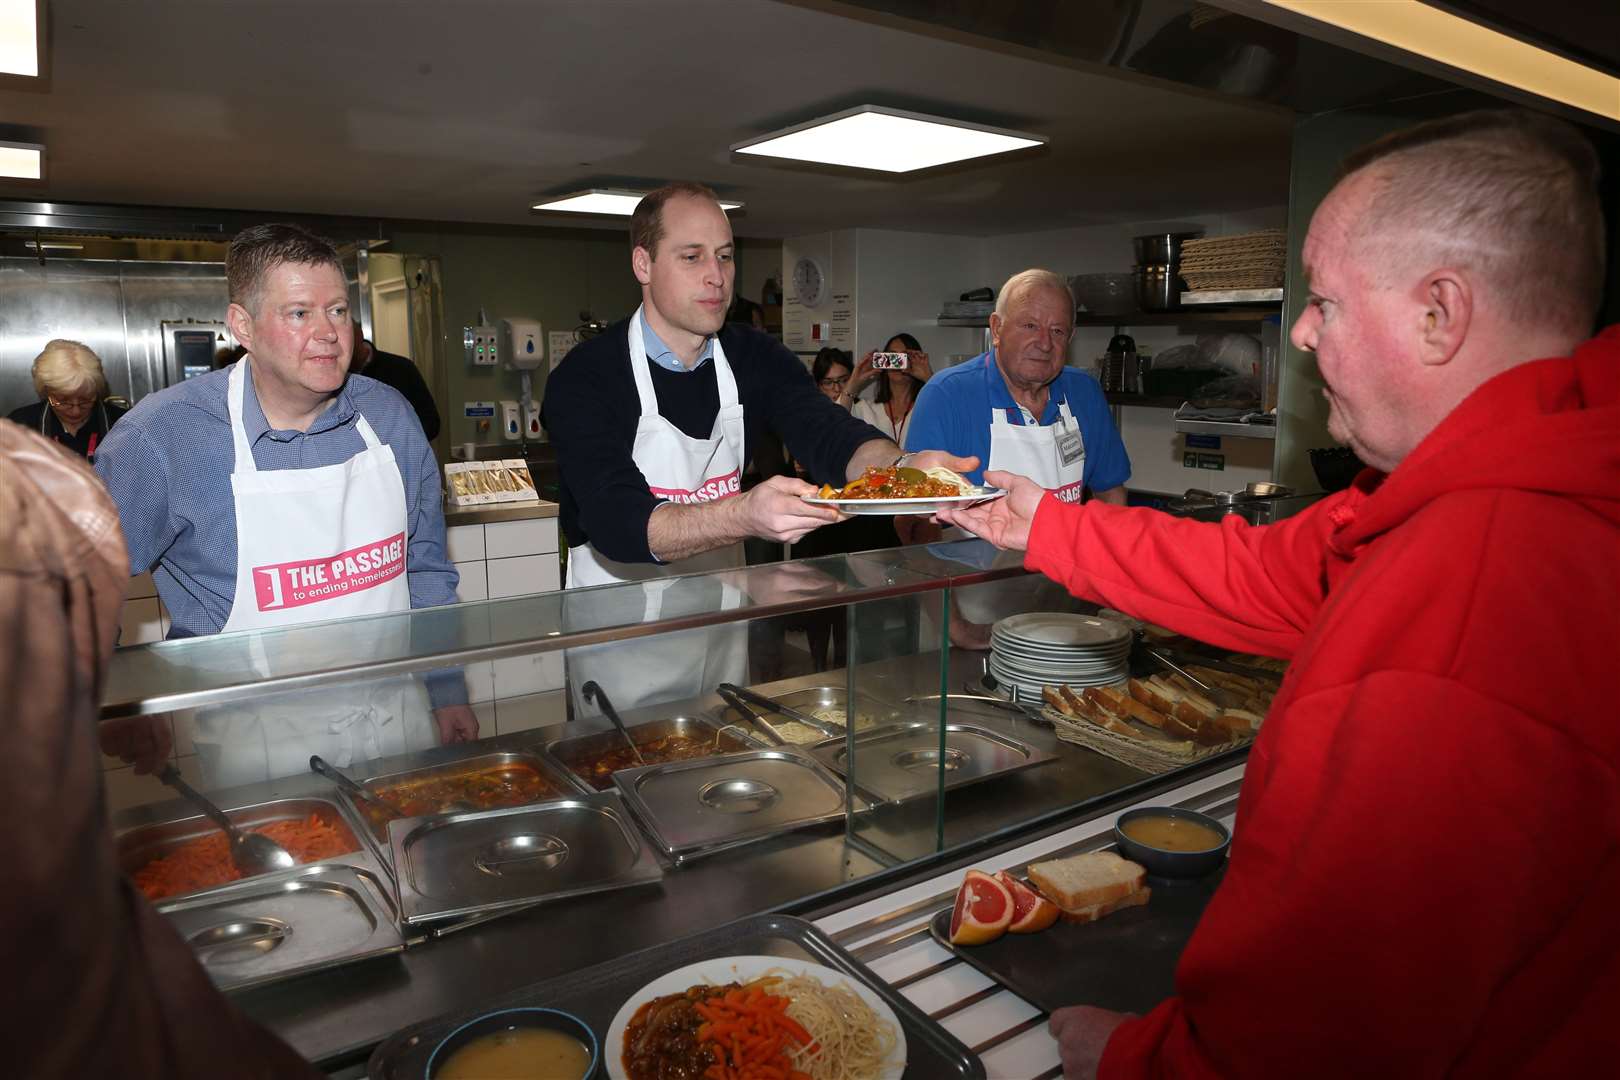 William served lunch during a visit to homelessness charity The Passage in 2019 (Ian Vogler/Daily Mirror/PA)